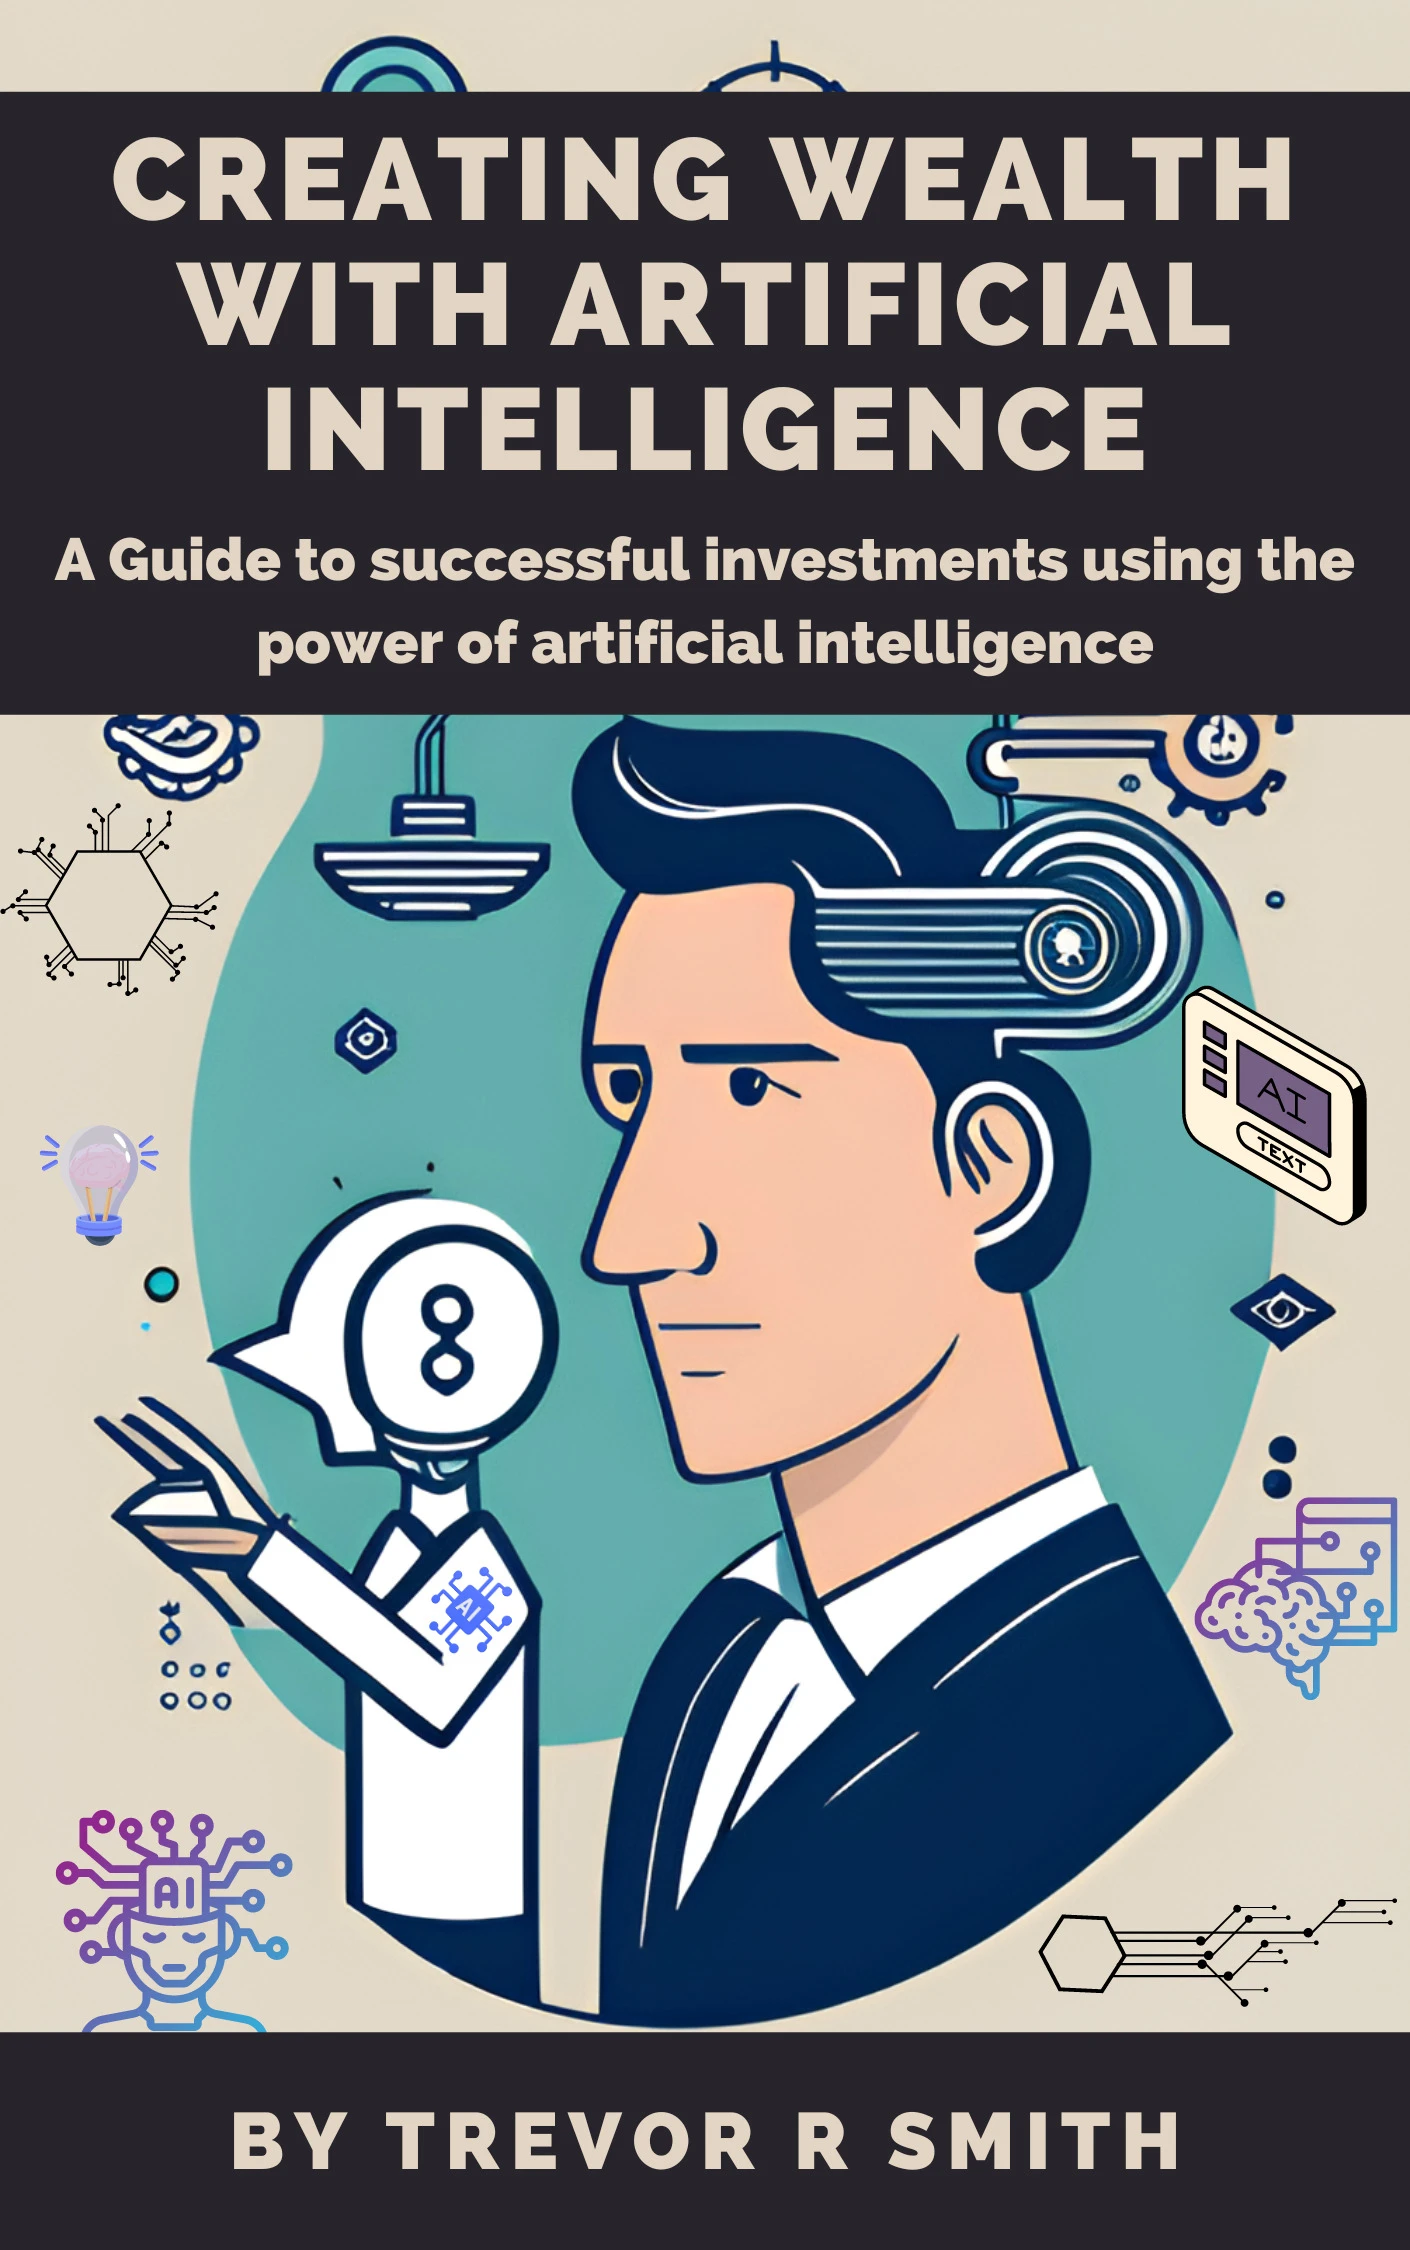 Creating Wealth with Artificial Intelligence – A Guide to Successful Investments Using the Power of Artificial Intelligence